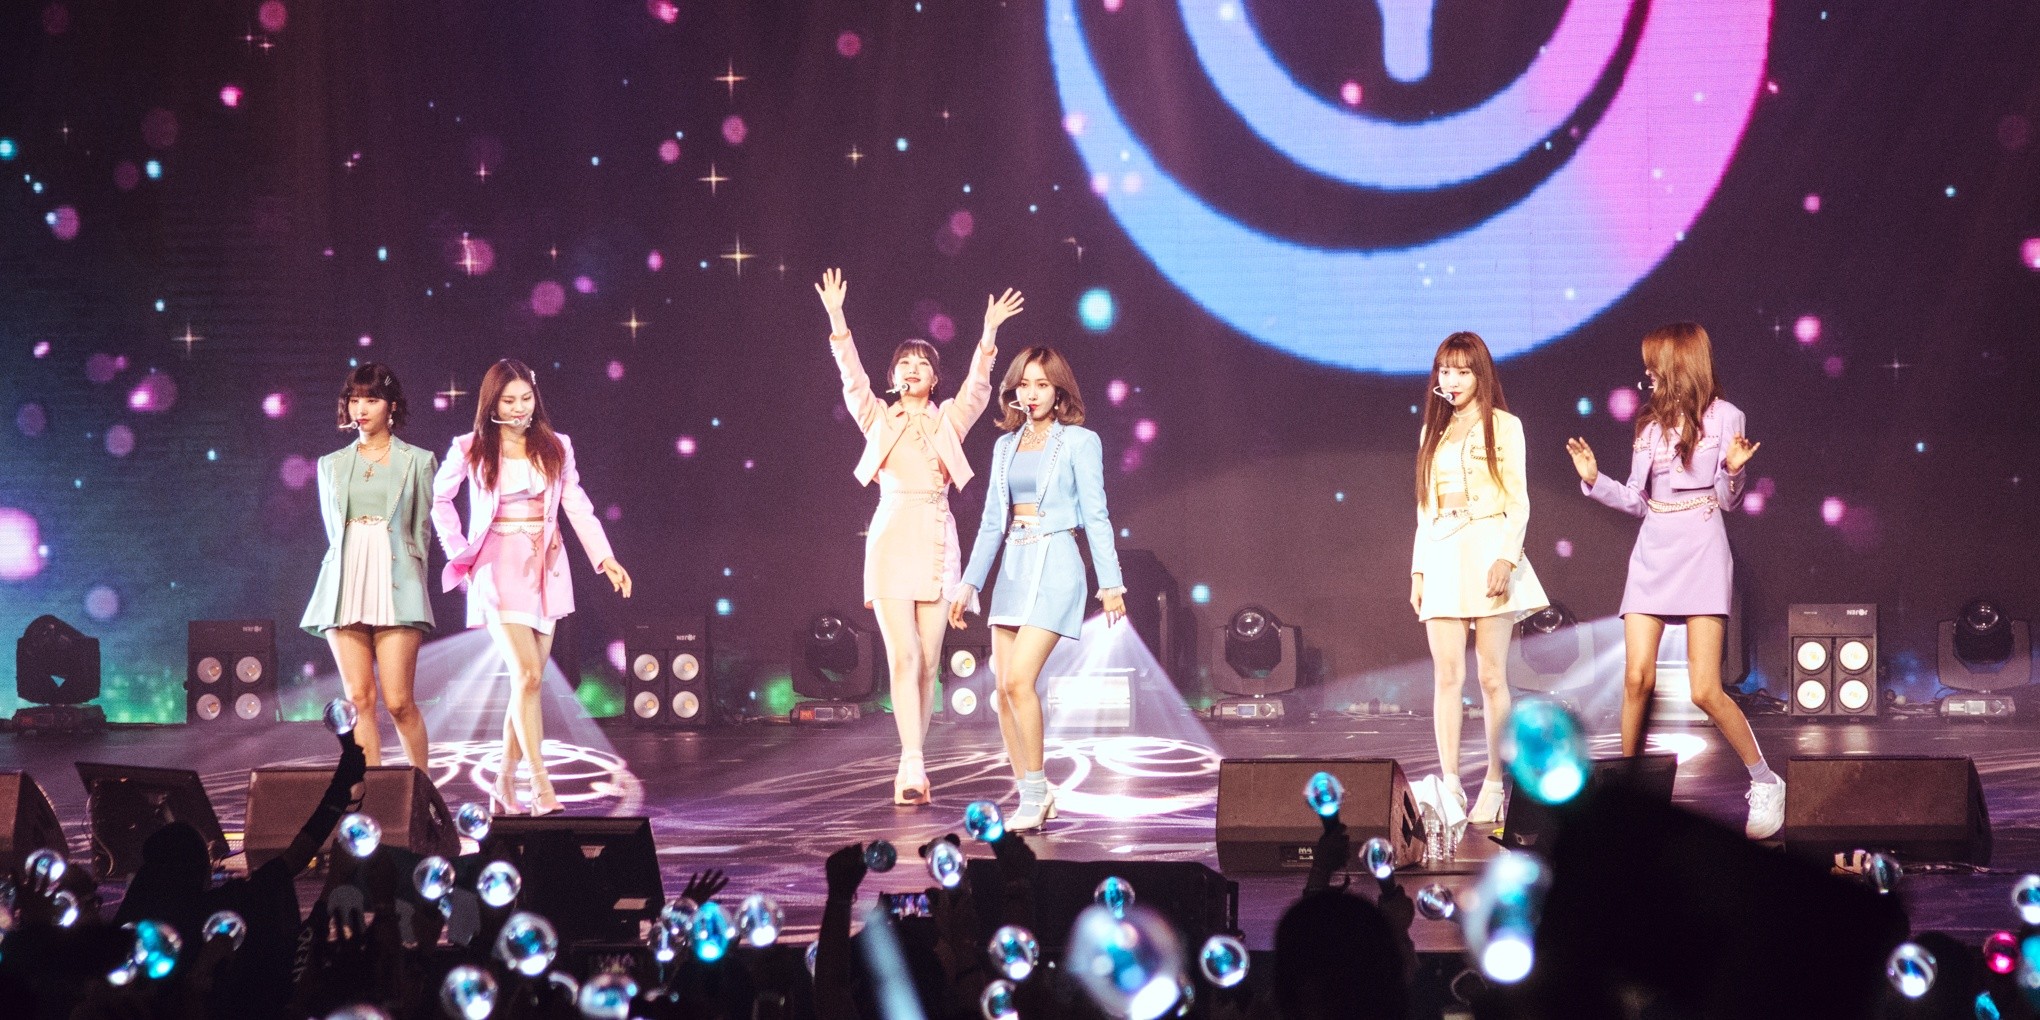 GFRIEND (여자친구) rekindled memories and celebrated love and friendship with Buddies at their Manila show – gig report